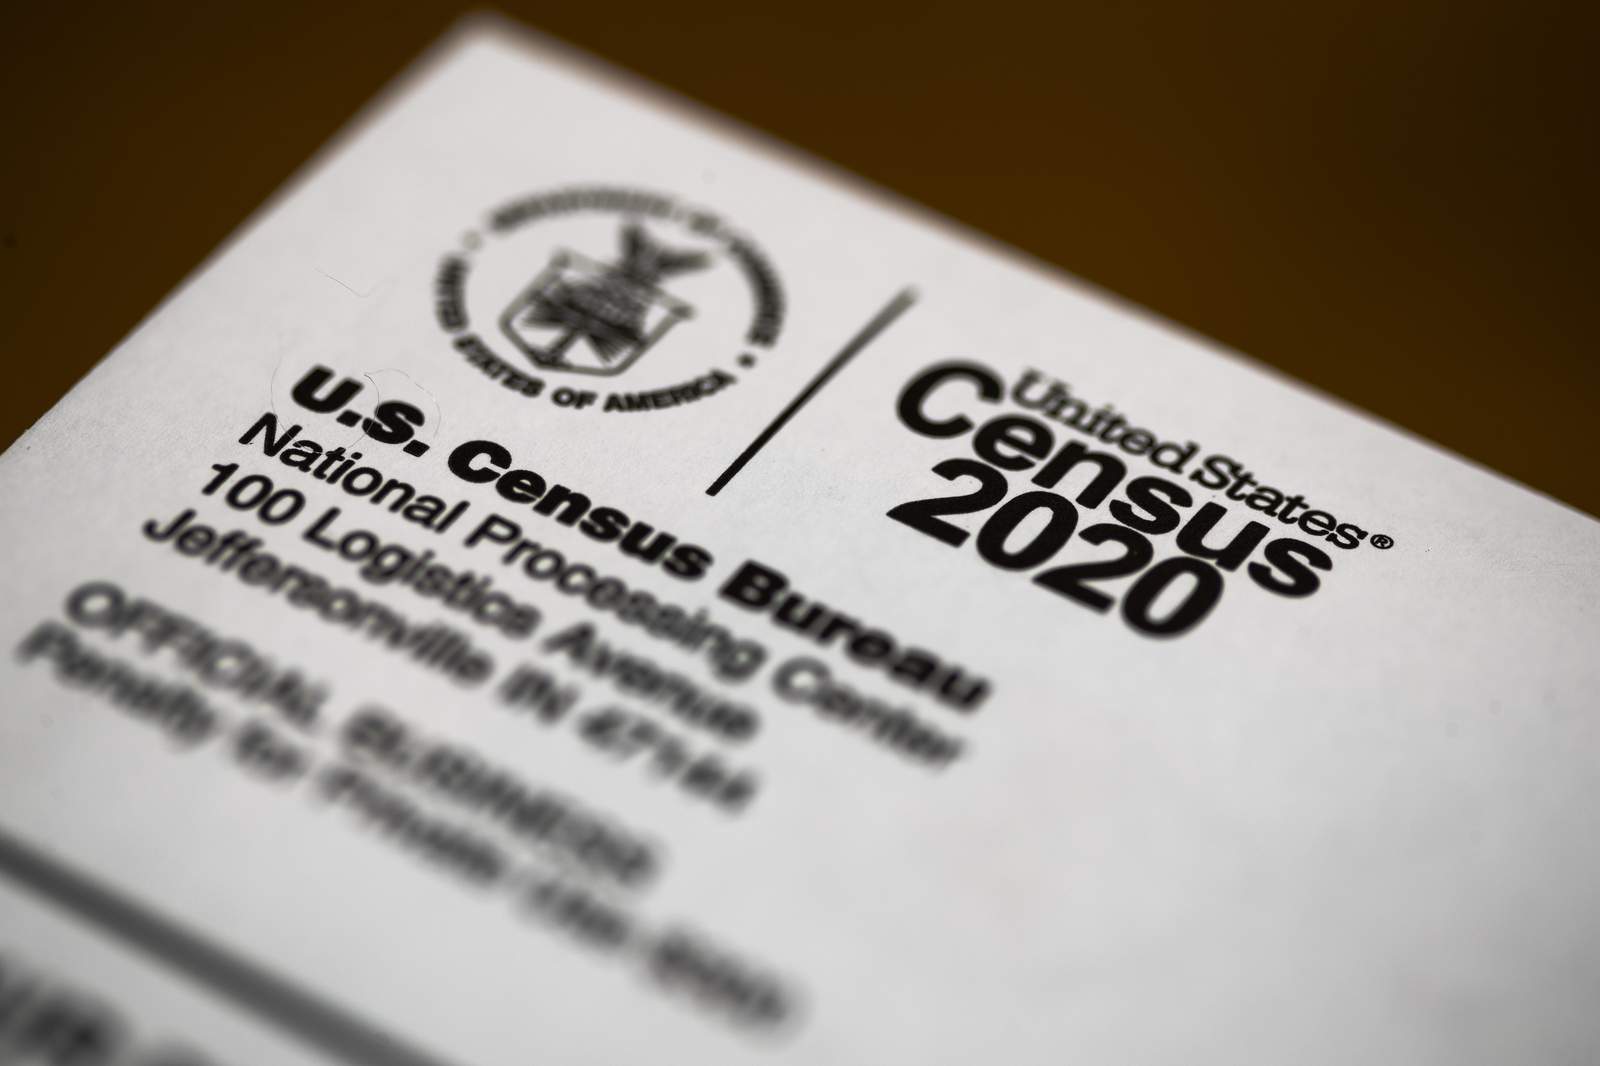 2020 Census: October 15 is the last day for Census count